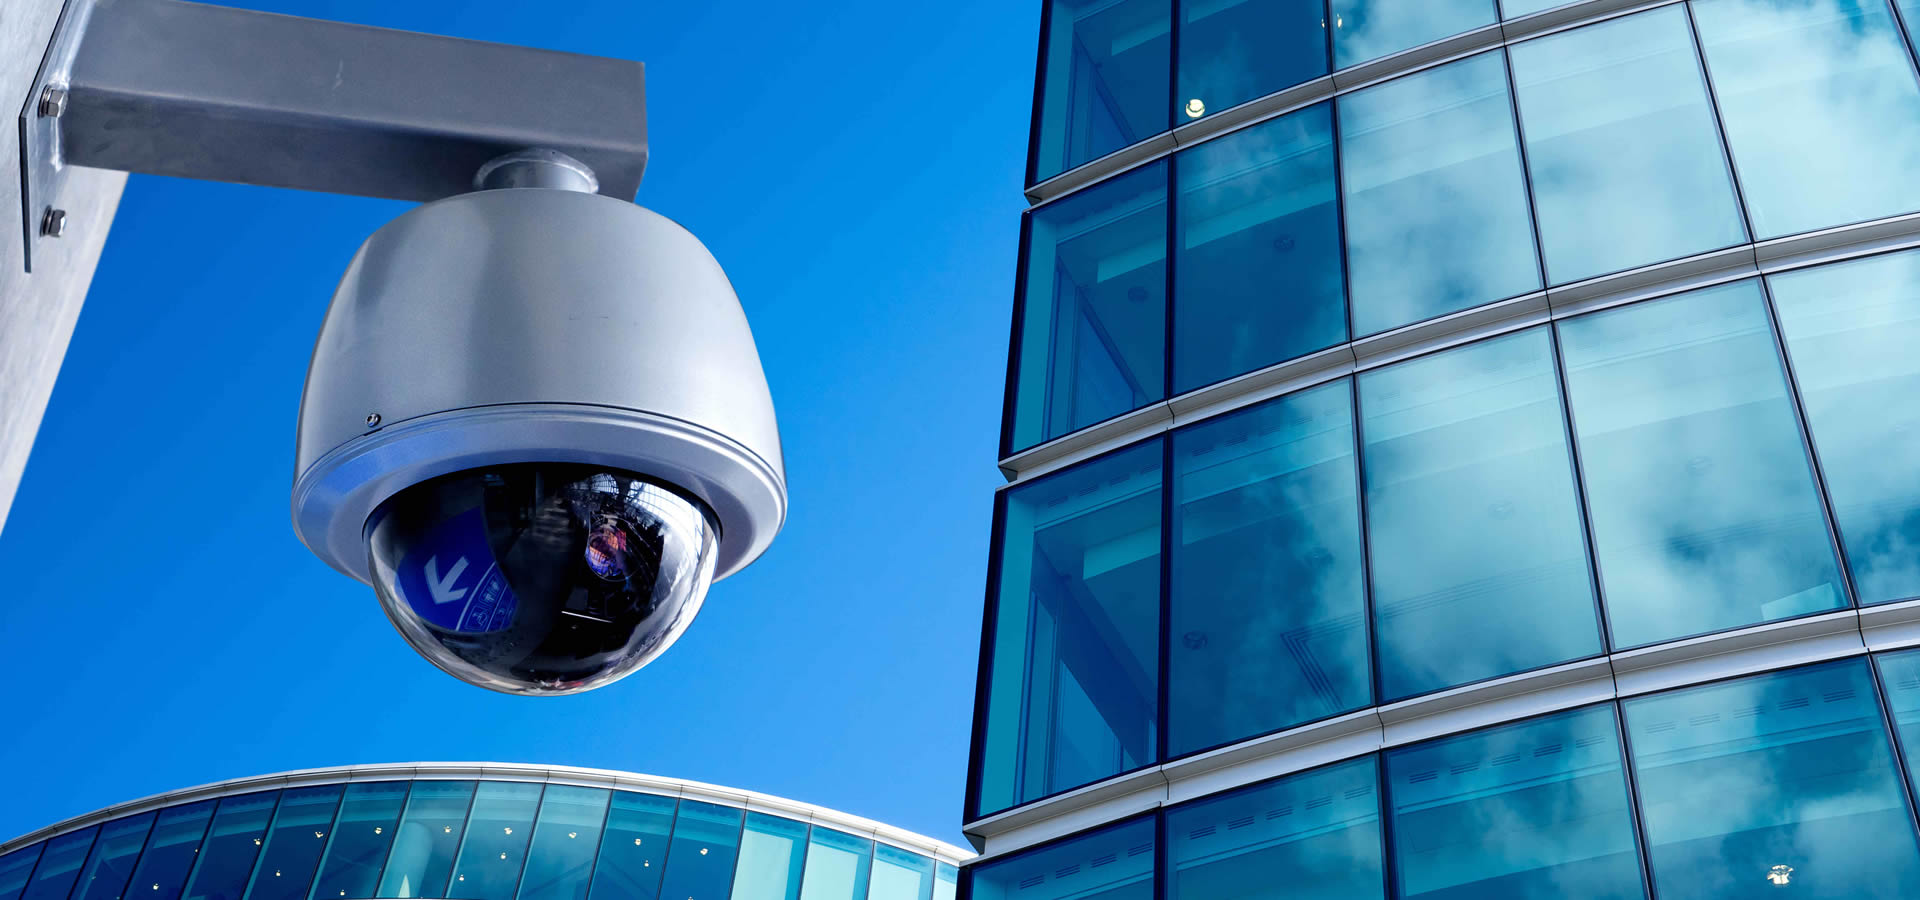 CCTV outdoors on side of modern glass building